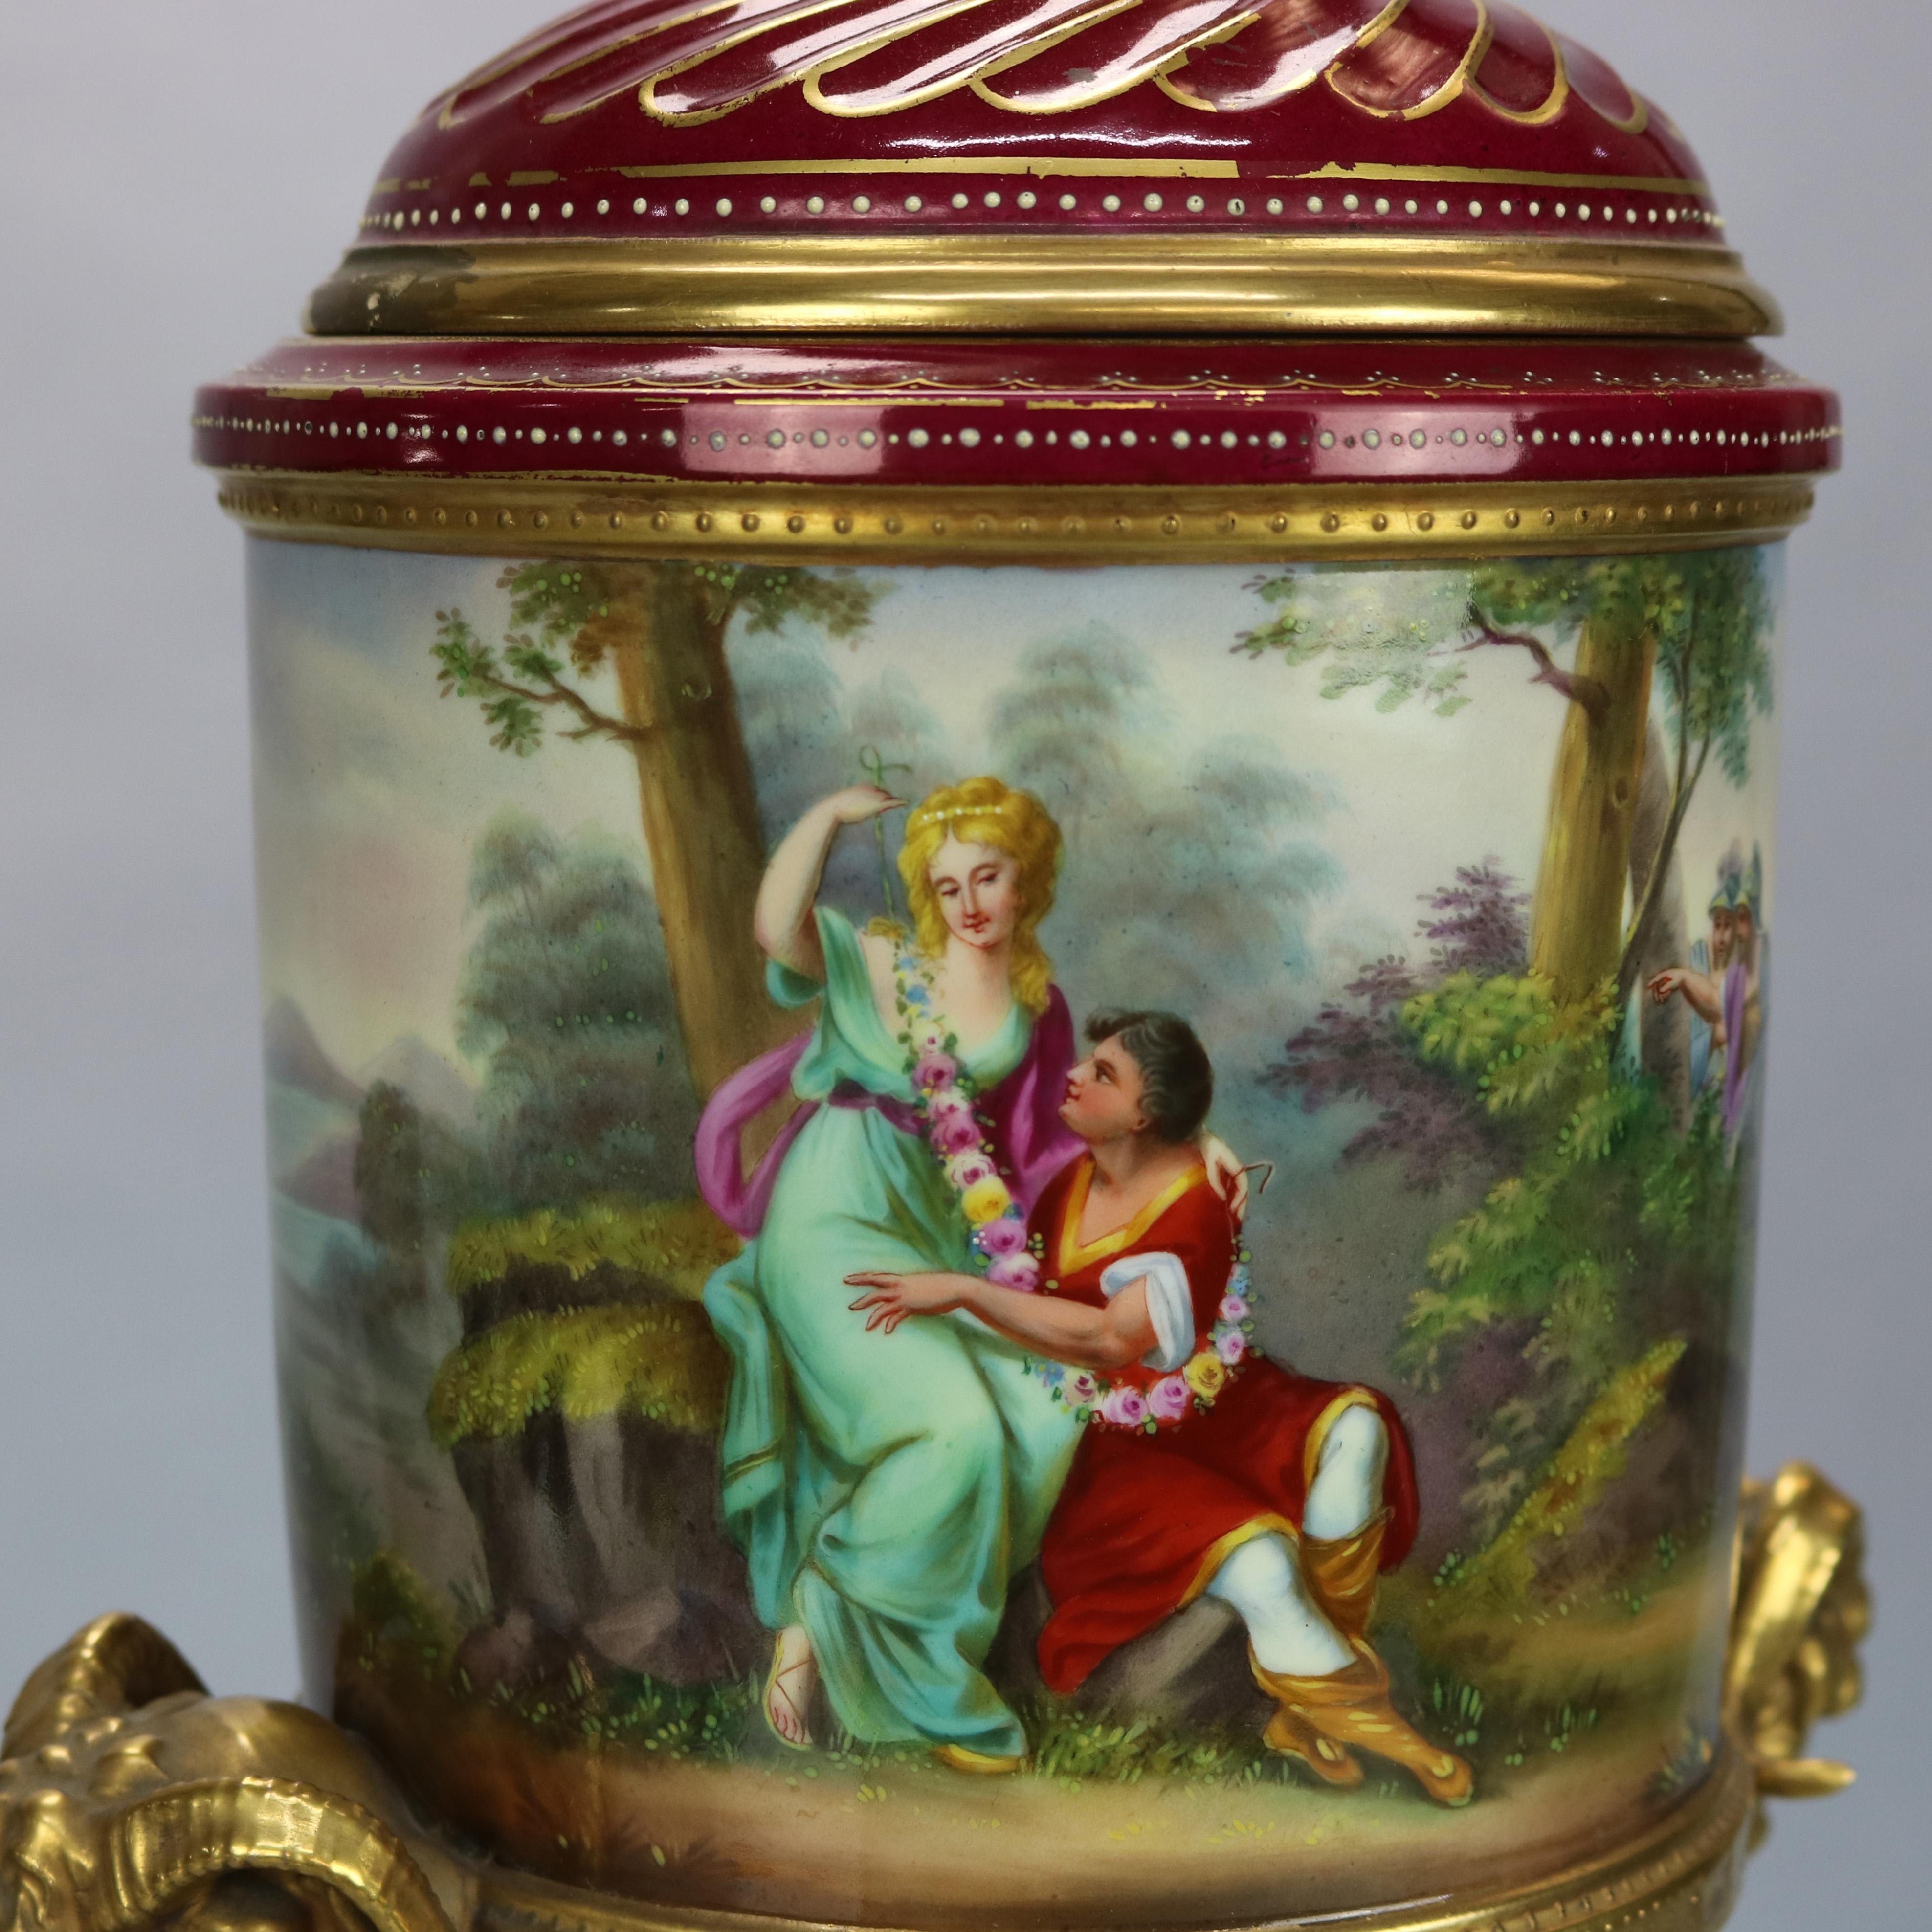 An antique and large Neoclassical artist signed urn by Royal Vienna offers porcelain construction with swirl lid having gilt pineapple finial and surmounting scenic urn having hand painted courting scene and en verso three Muses with cherub in